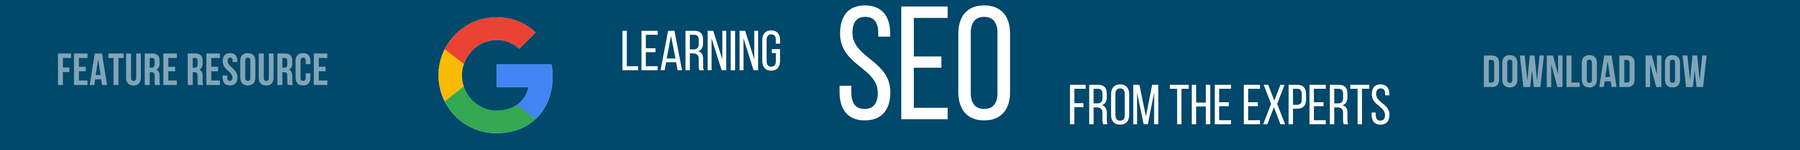 FEATURE RESOURCE earning SEO from the Experts square CTA (1).png